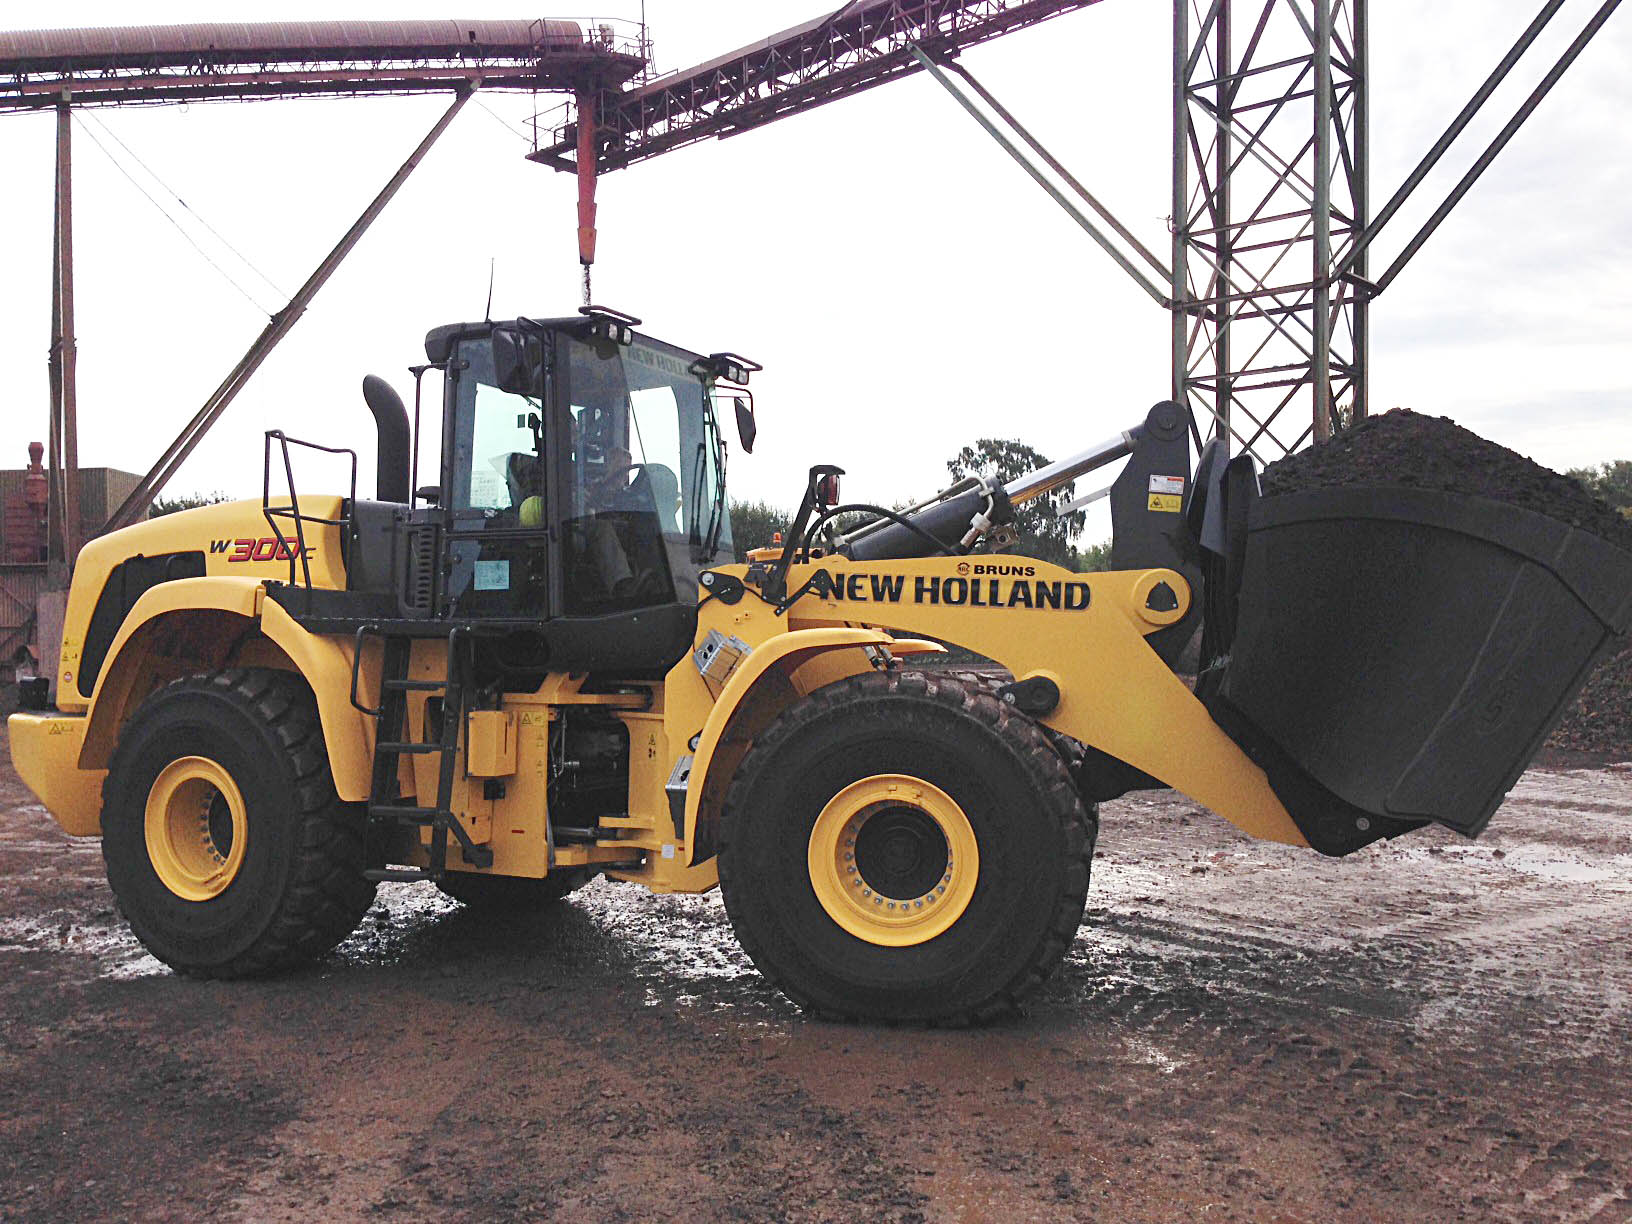 New Holland Construction/CNH Global Post-23175-1404308771